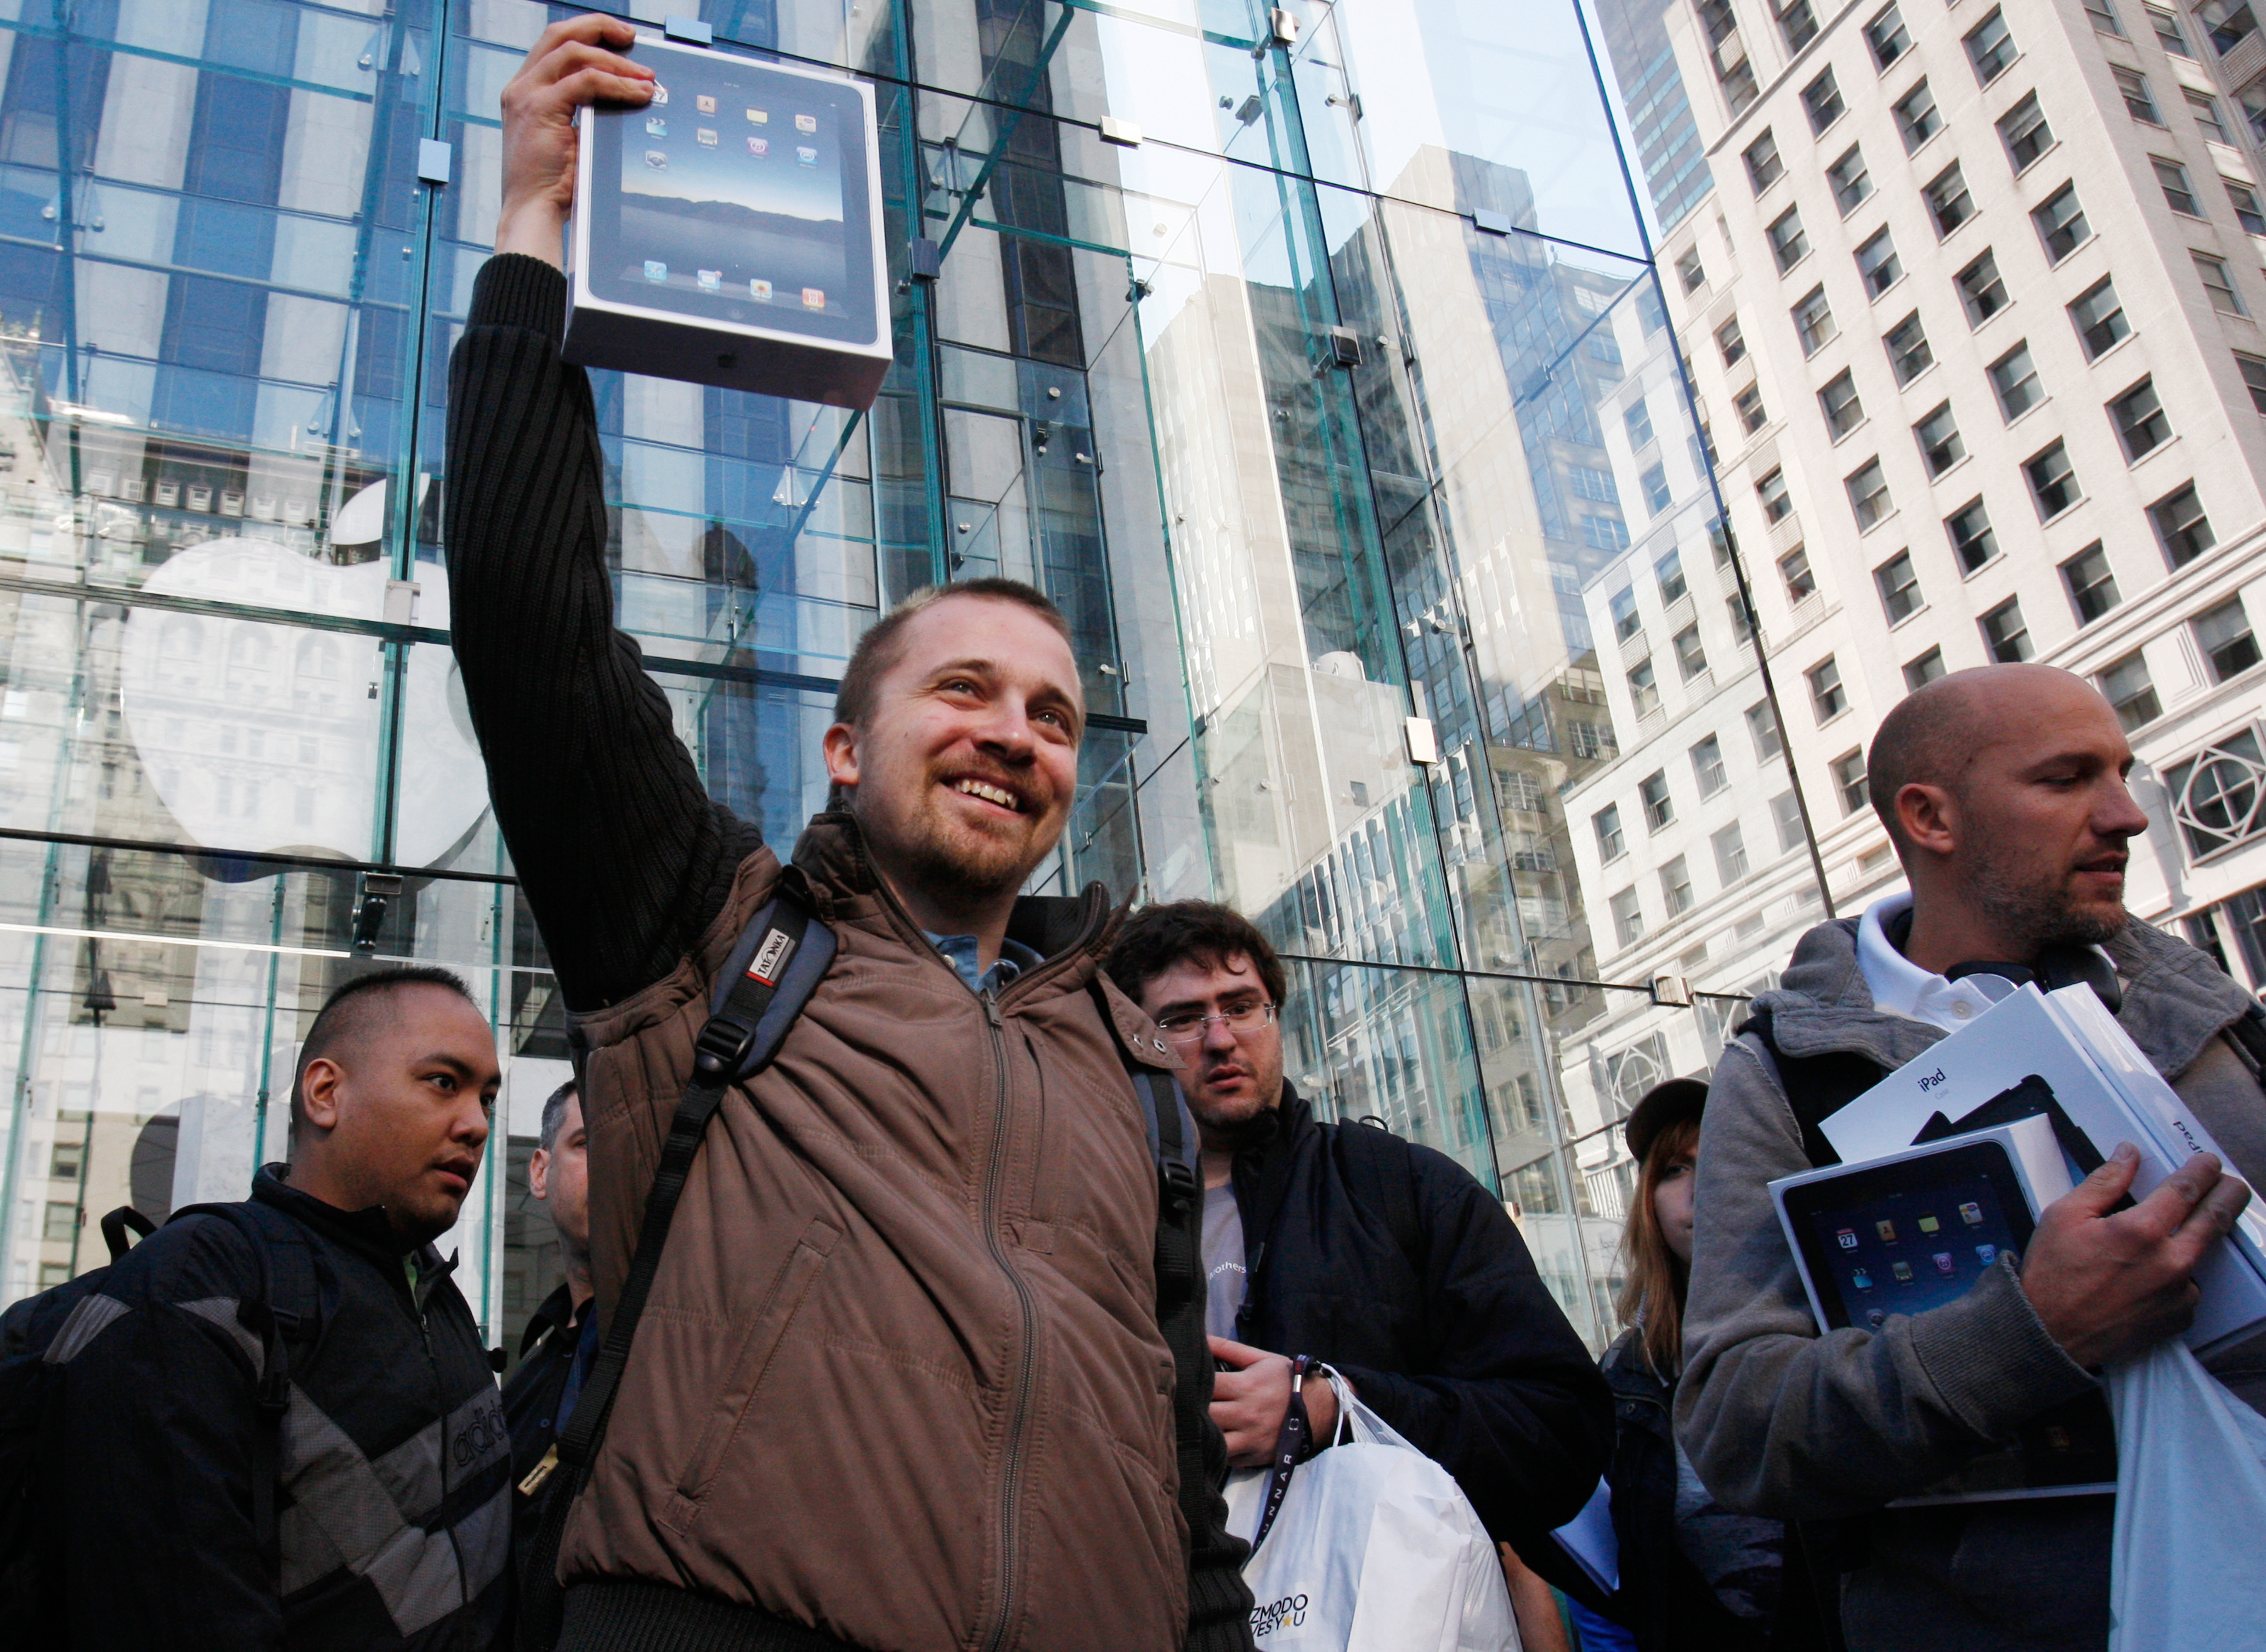 A customer lifts his iPad over his head after leaving the iPad launch at the Apple Store in New York.